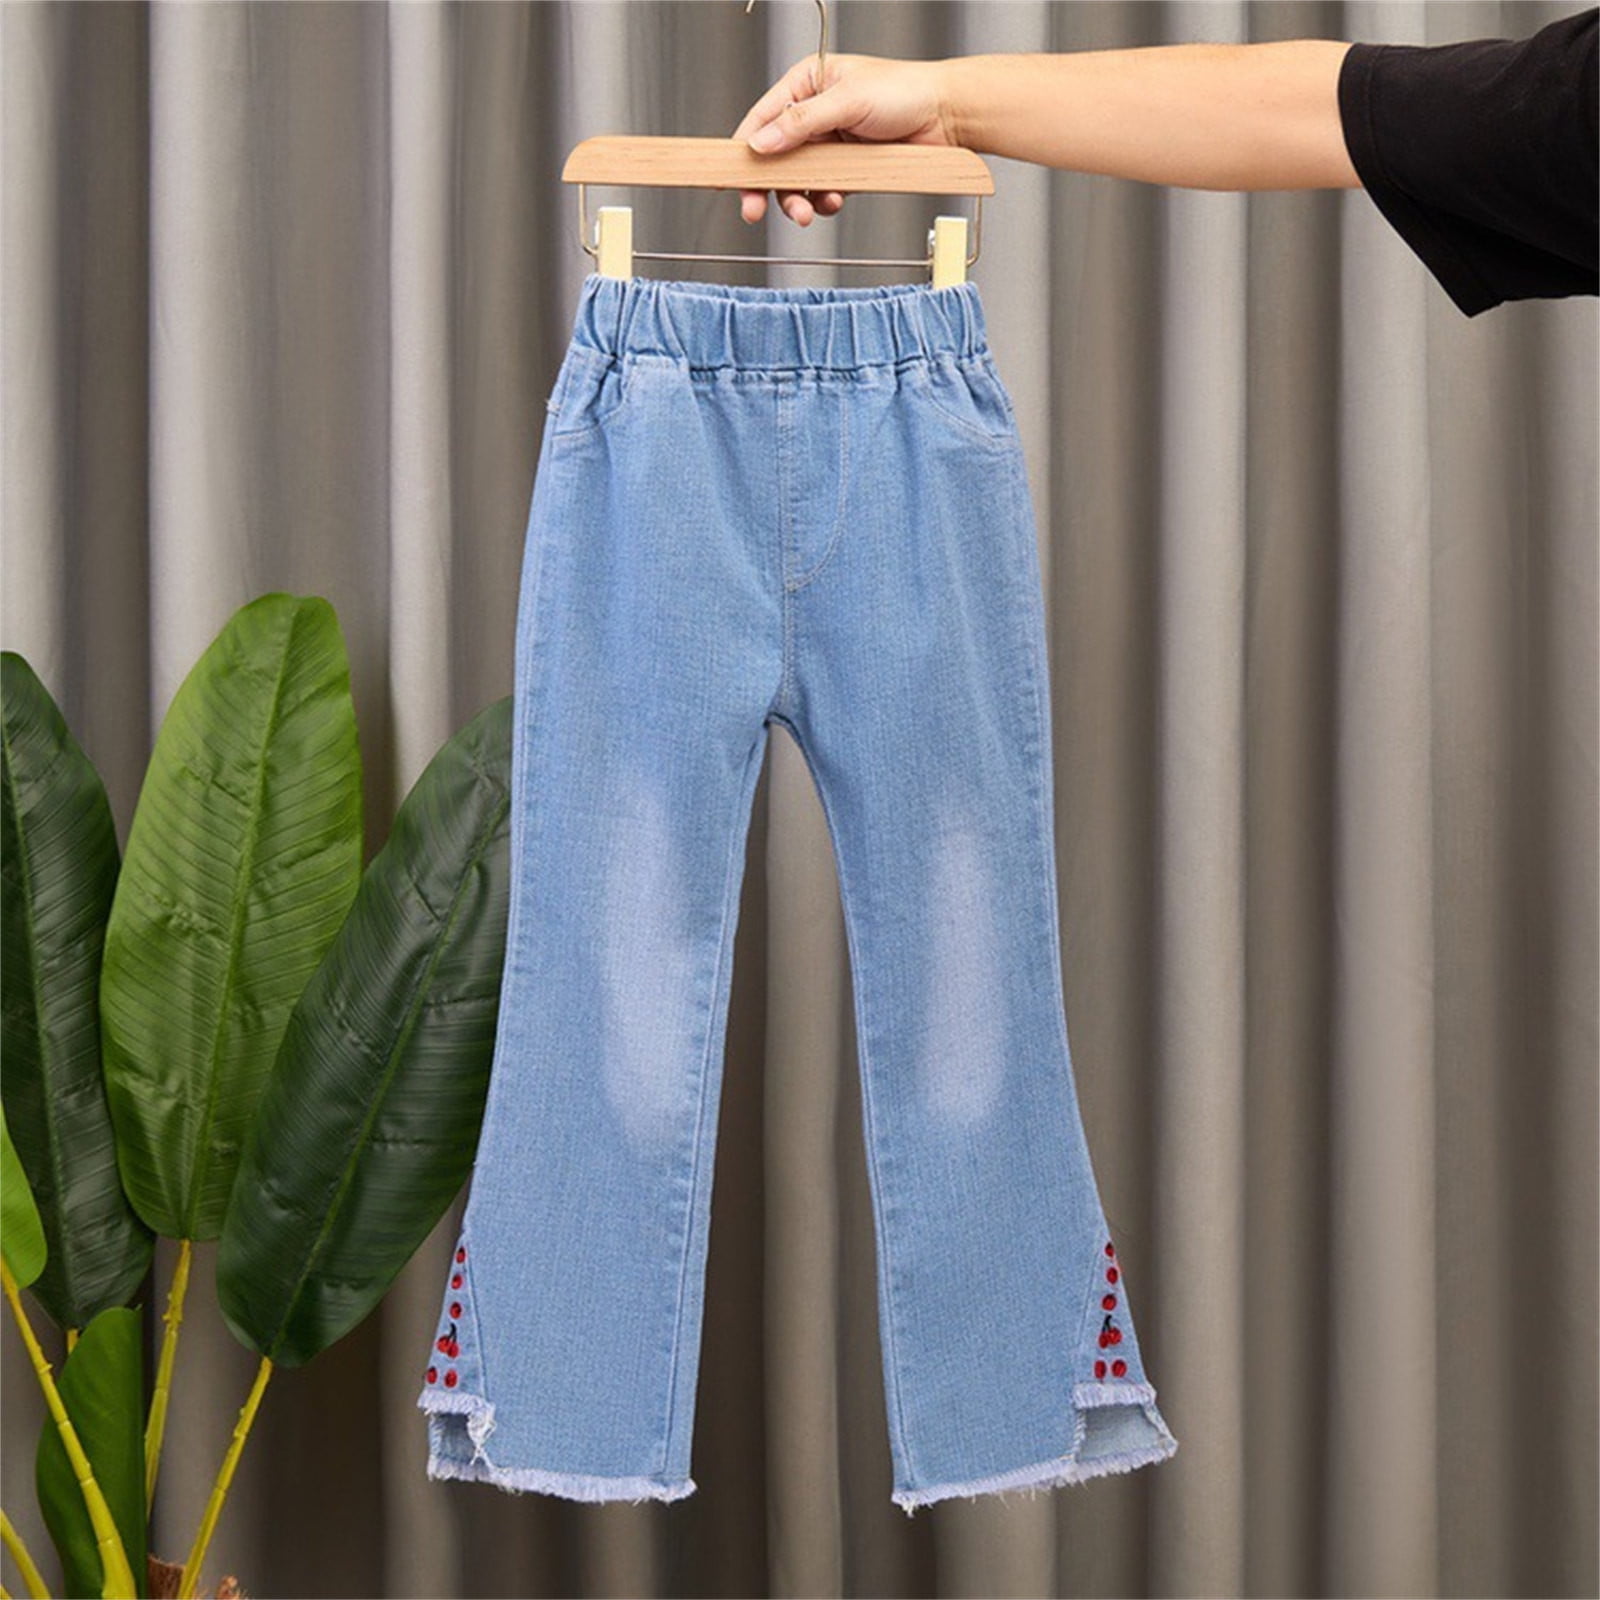 Baby Delas!2-13 Years Girls Flare Wide Baggy Jeans Girls,Flare Flared Leg Flare Jeans,Girls Jeans Jeans,Girls Jeans Jeans Girls,Toddler Bootcut for Girls,Toddler Pants,Bootcut